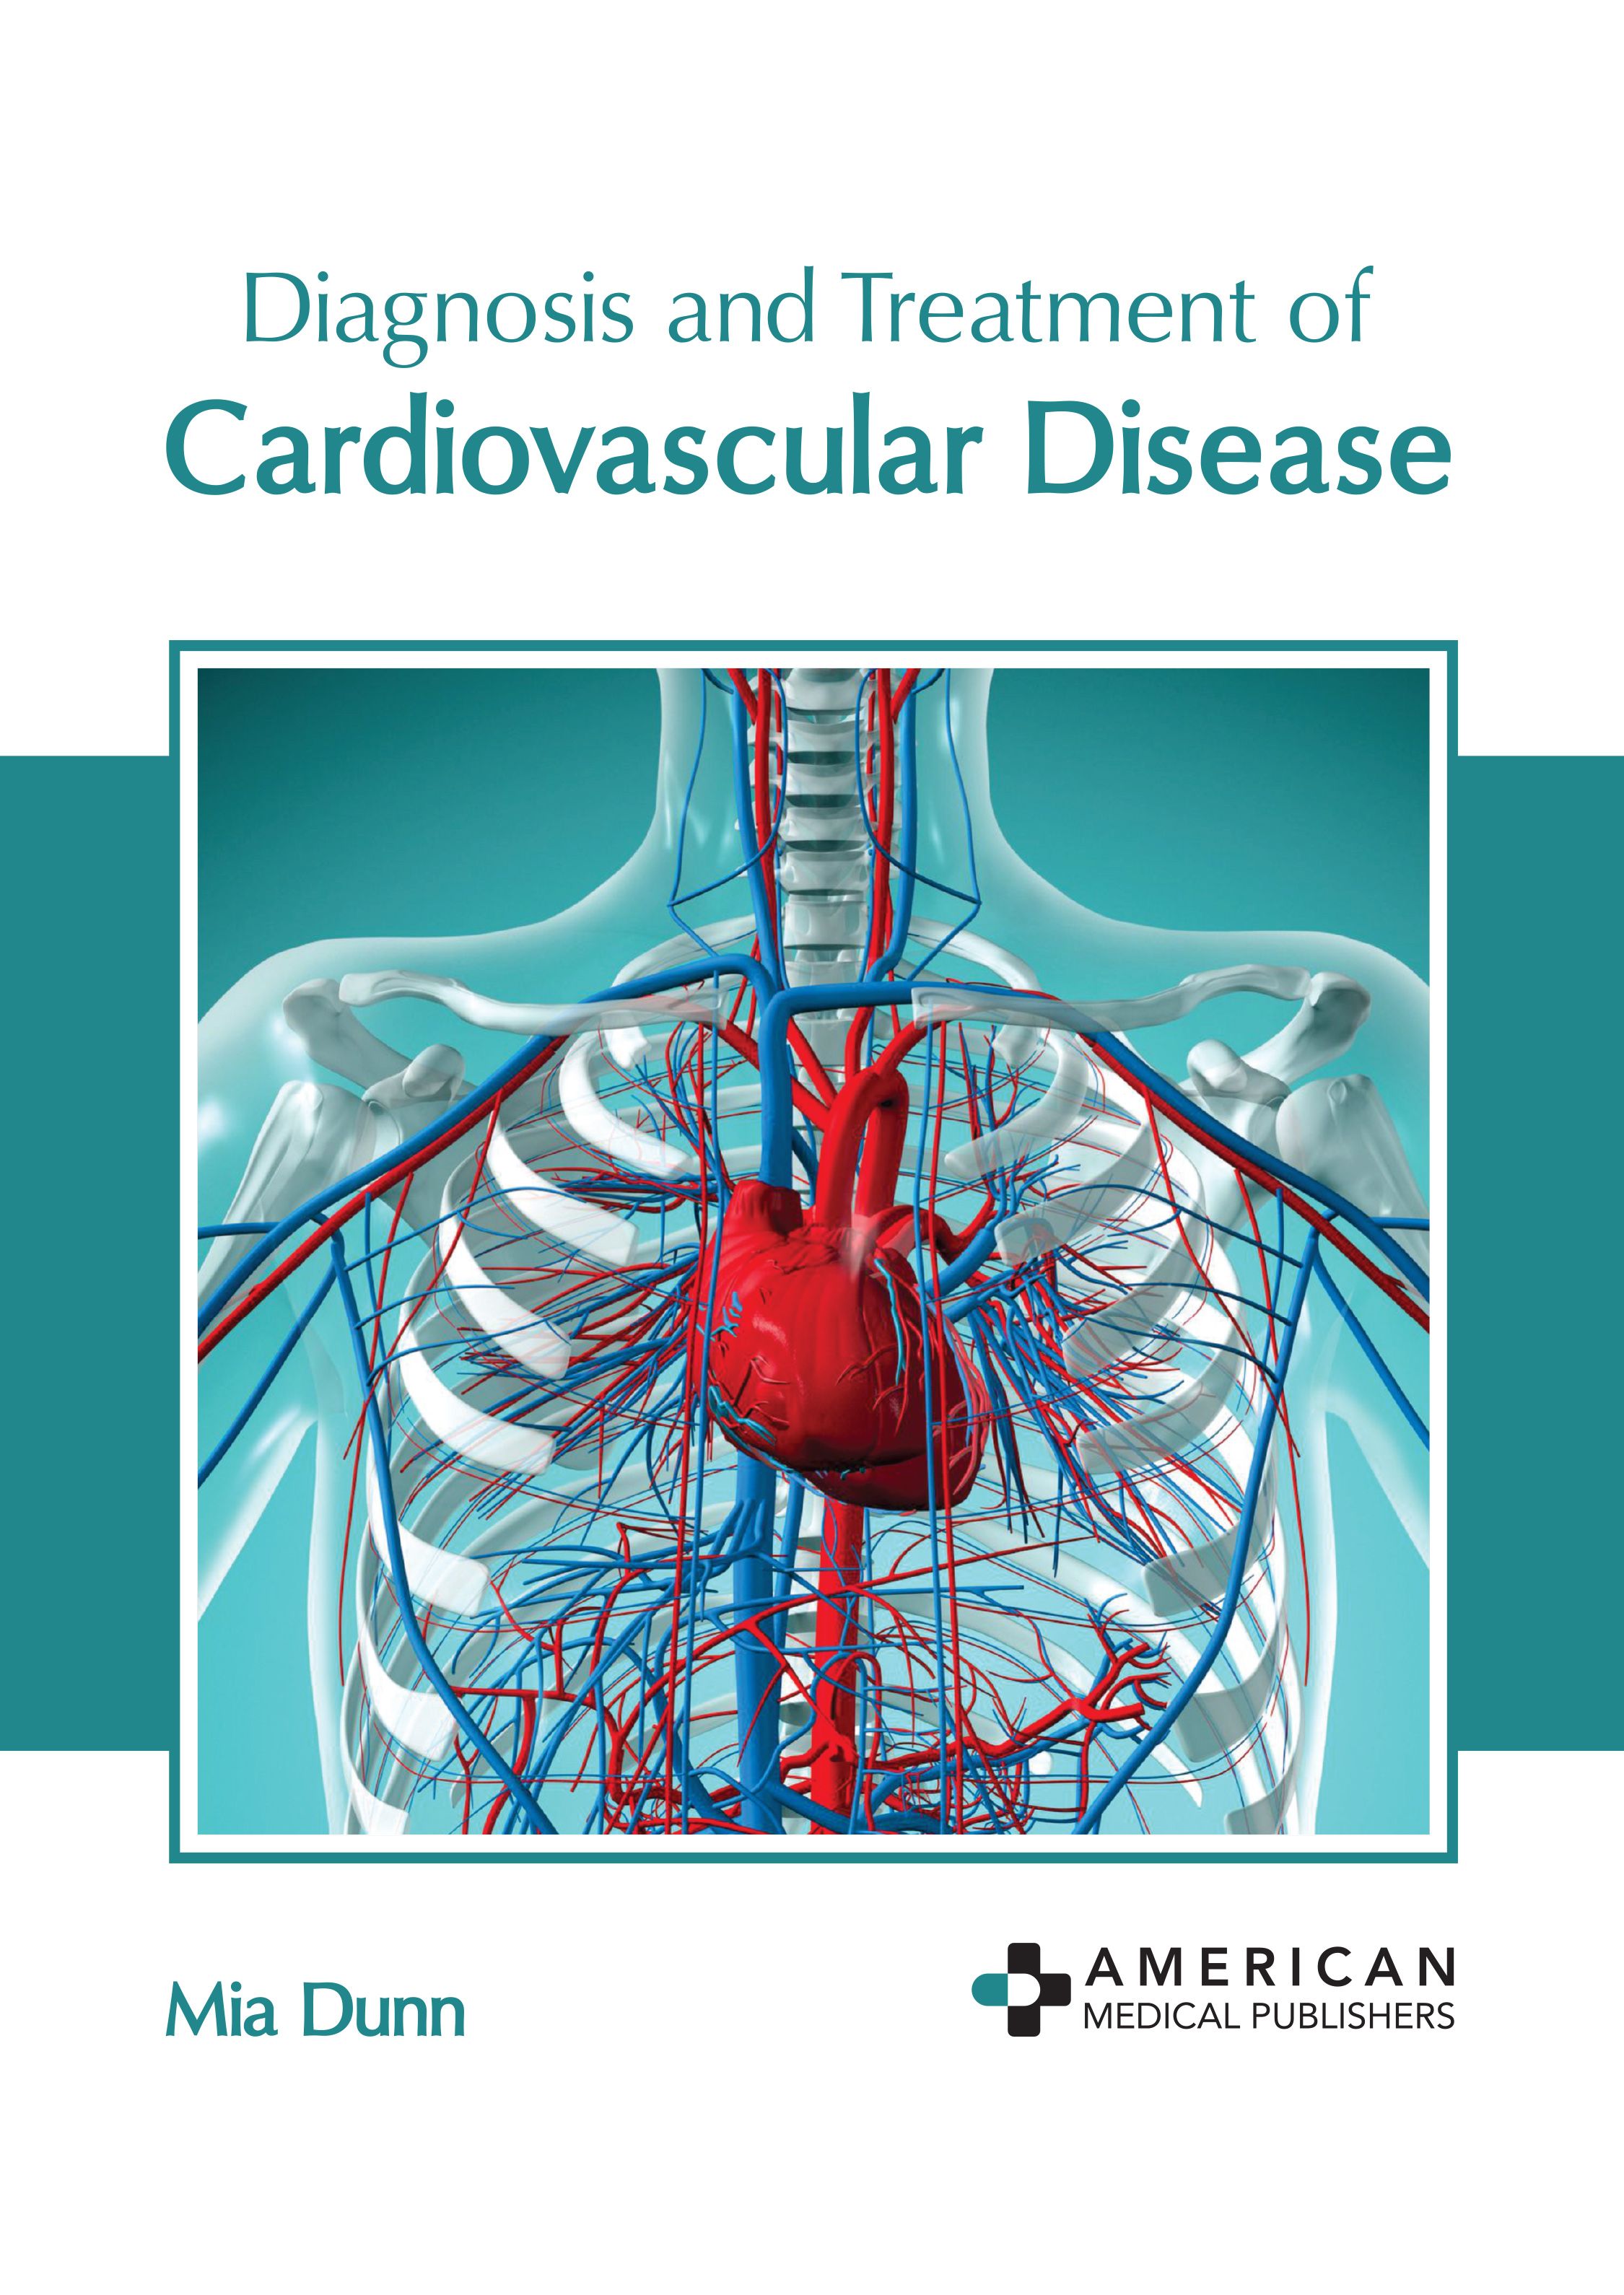 

exclusive-publishers/american-medical-publishers/diagnosis-and-treatment-of-cardiovascular-disease-9781639276578